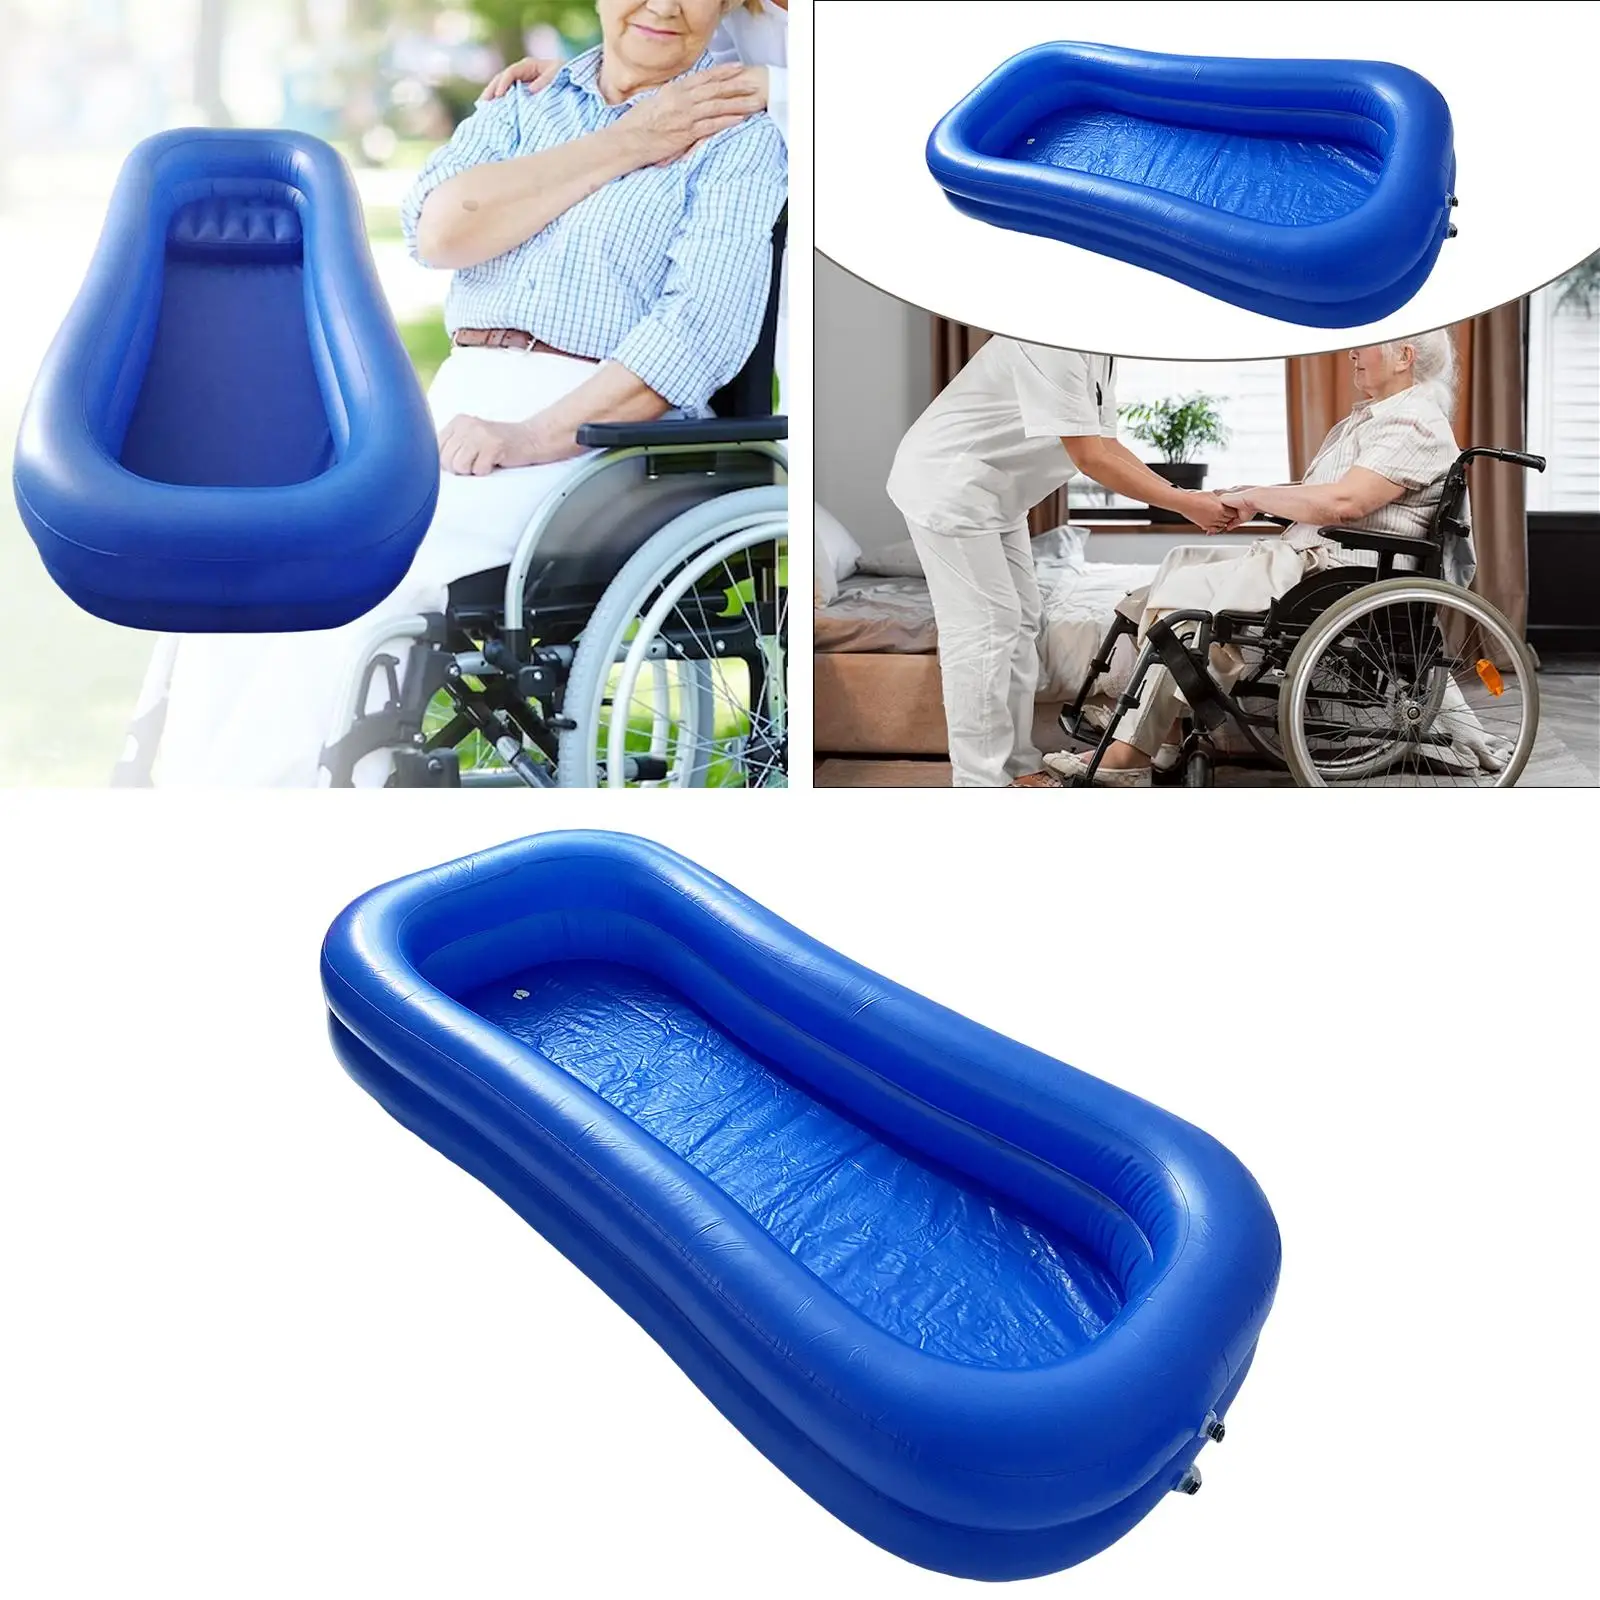 Inflatable Bathtub Portable Foldable Bath in Bed Body Washing Basin System for Disabled Elderly Bedridden Handicapped Adults